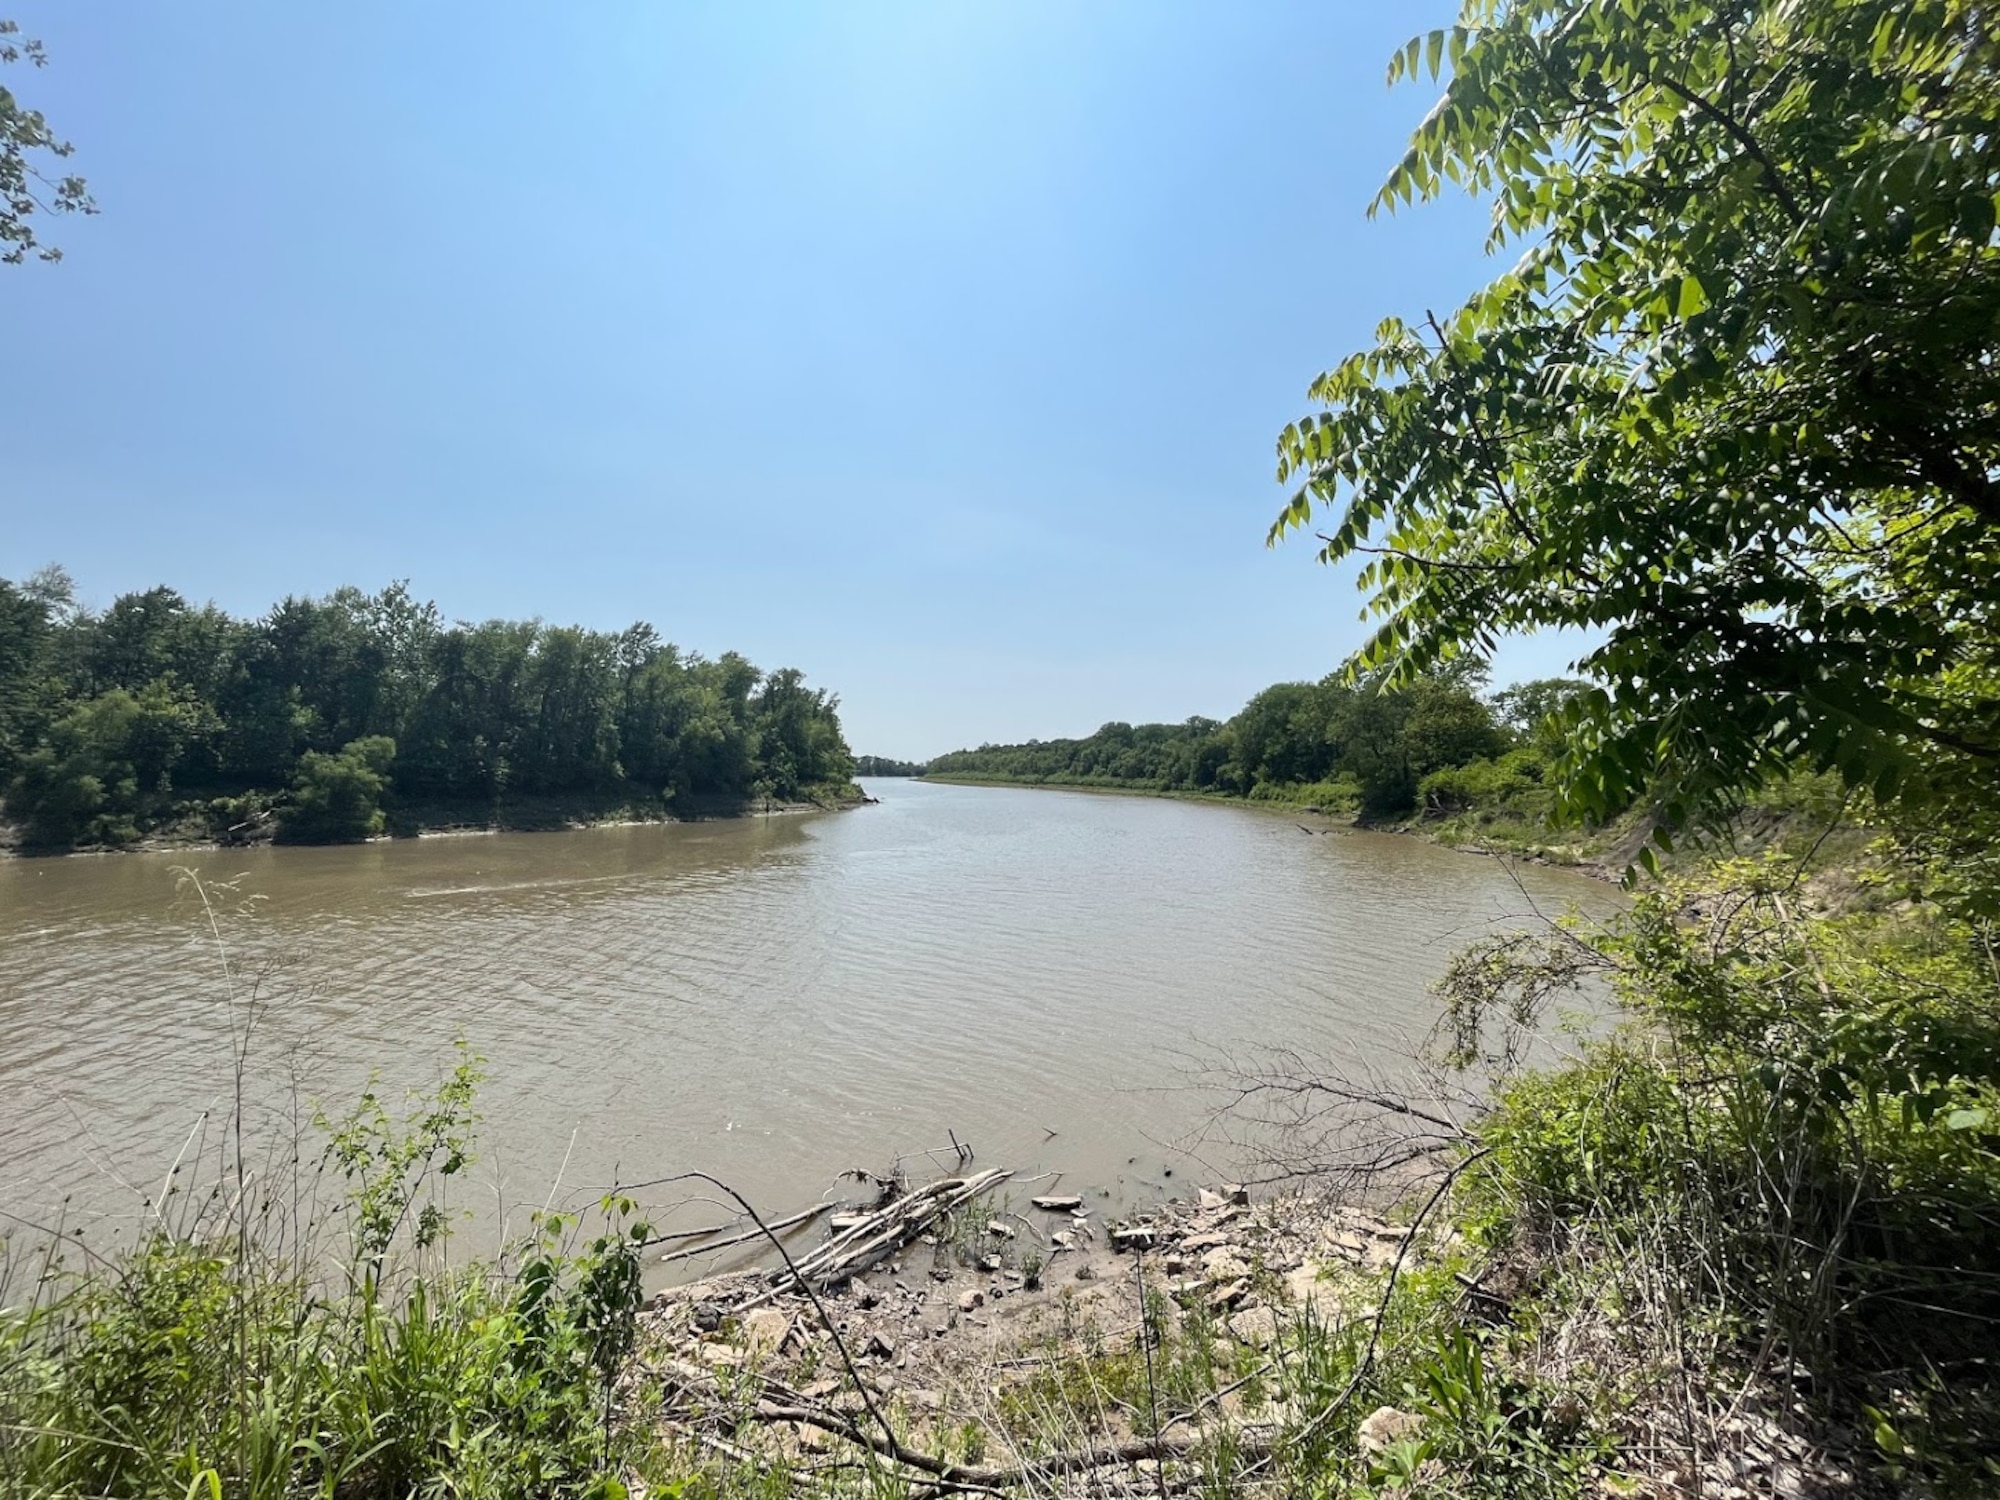 The Missouri River can be seen flowing with trees on either side and a blue sky in the background.